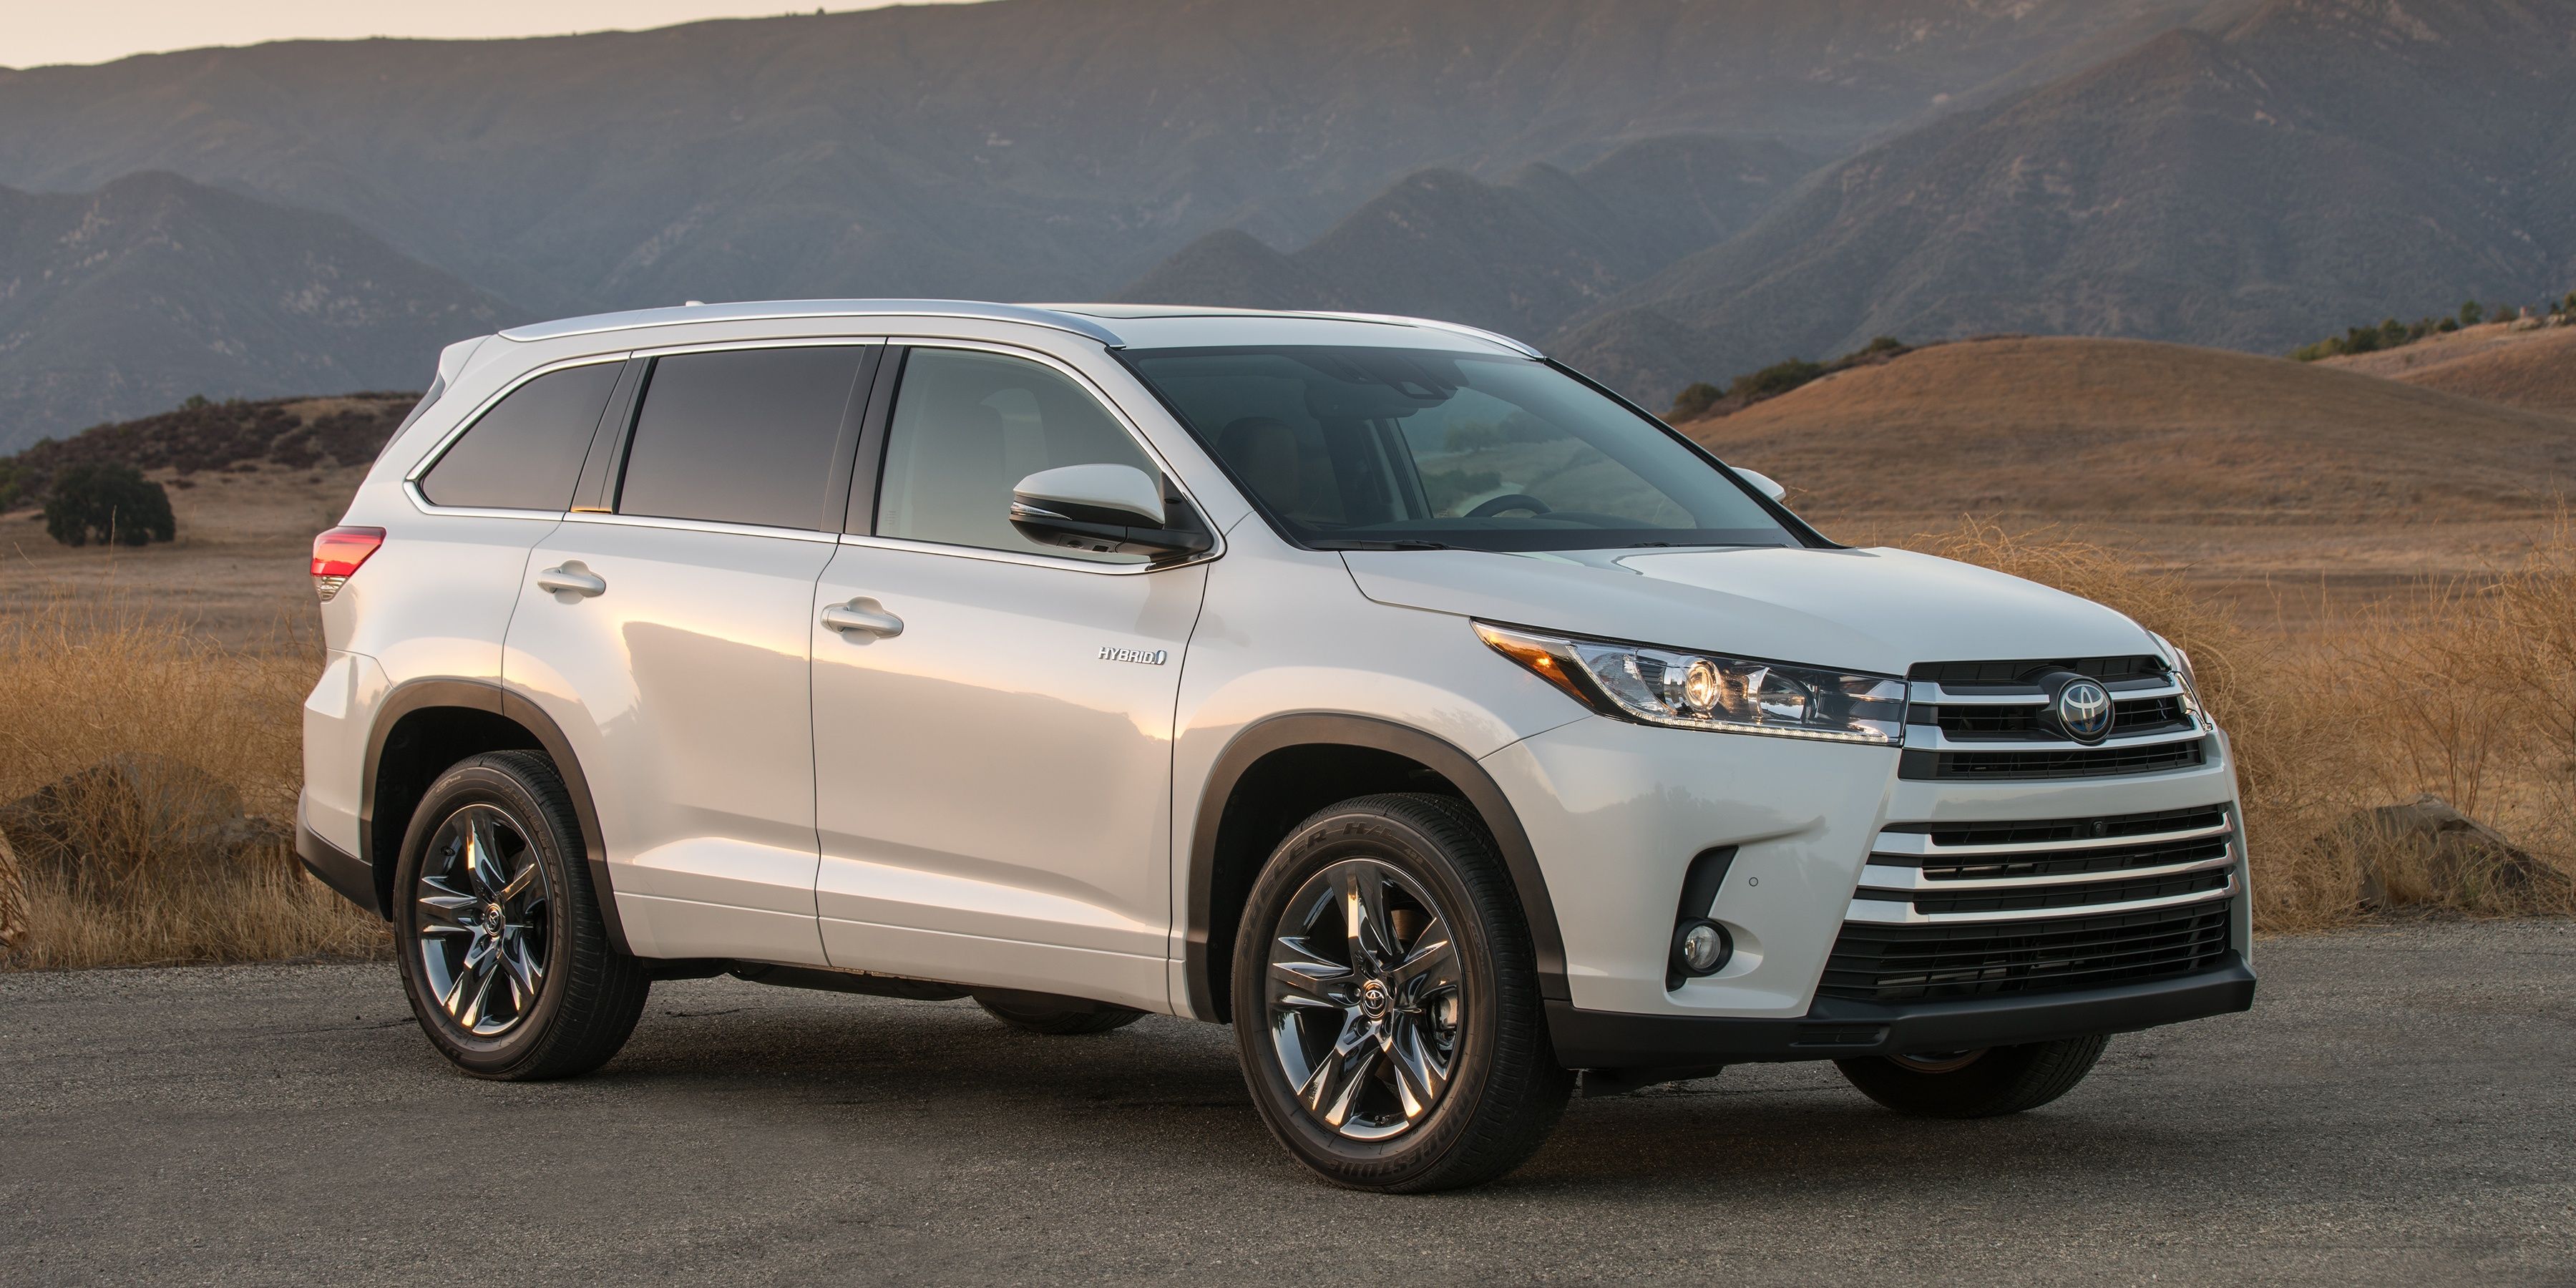 Here Are The 10 Best Crossovers With 3 Row Seating You Can Buy